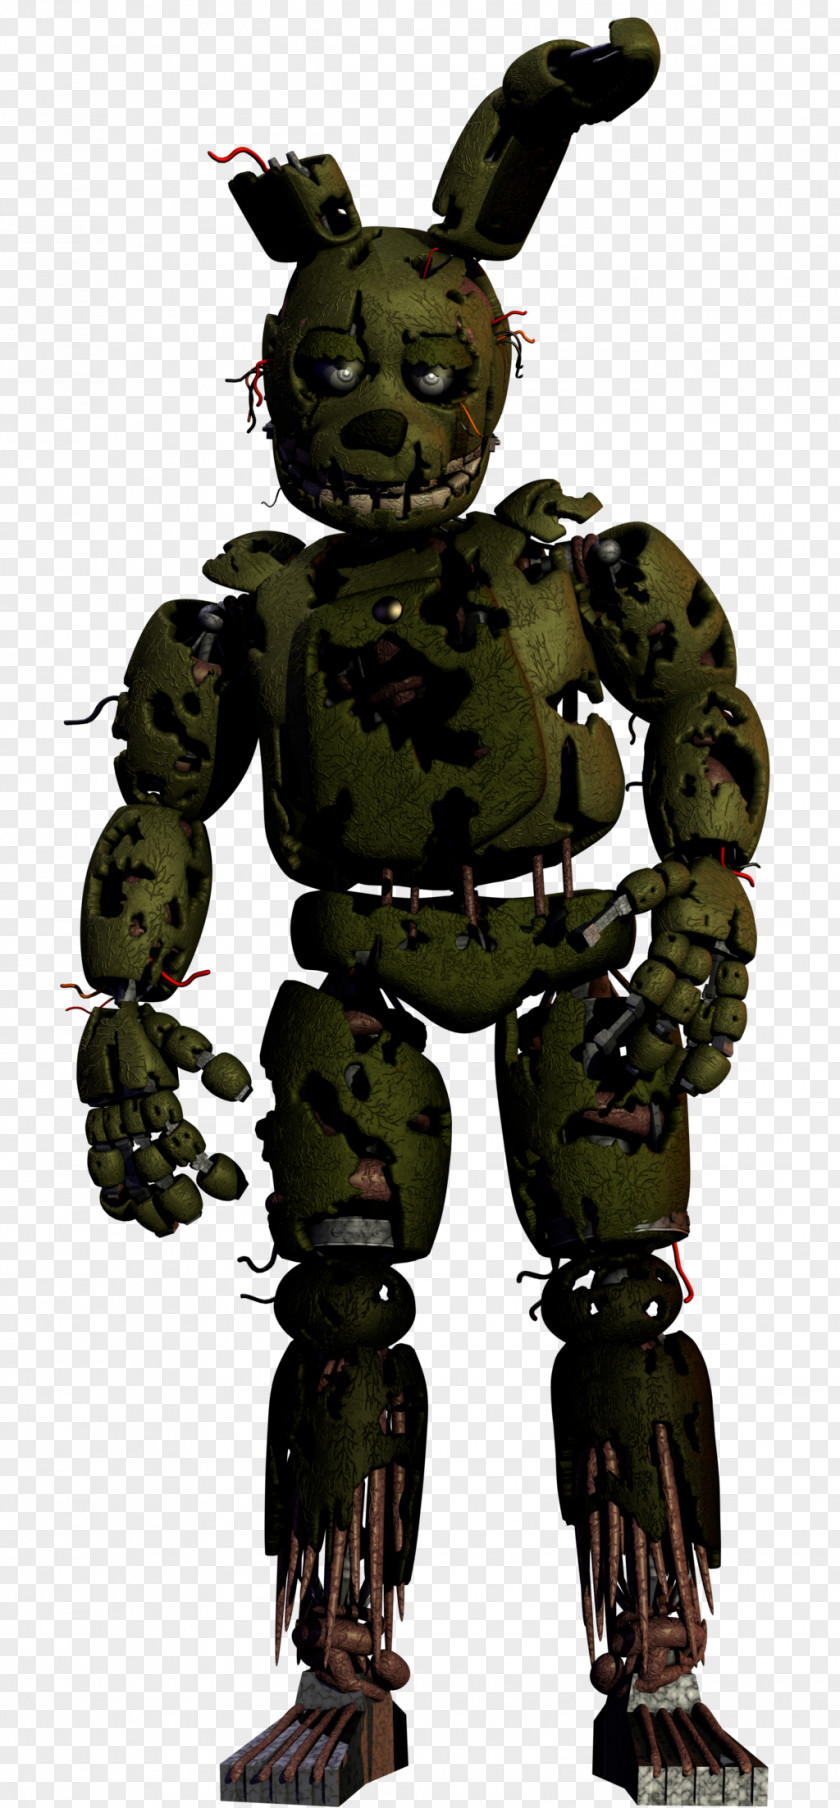 Baby Costume Five Nights At Freddy's 3 2 4 Animatronics PNG